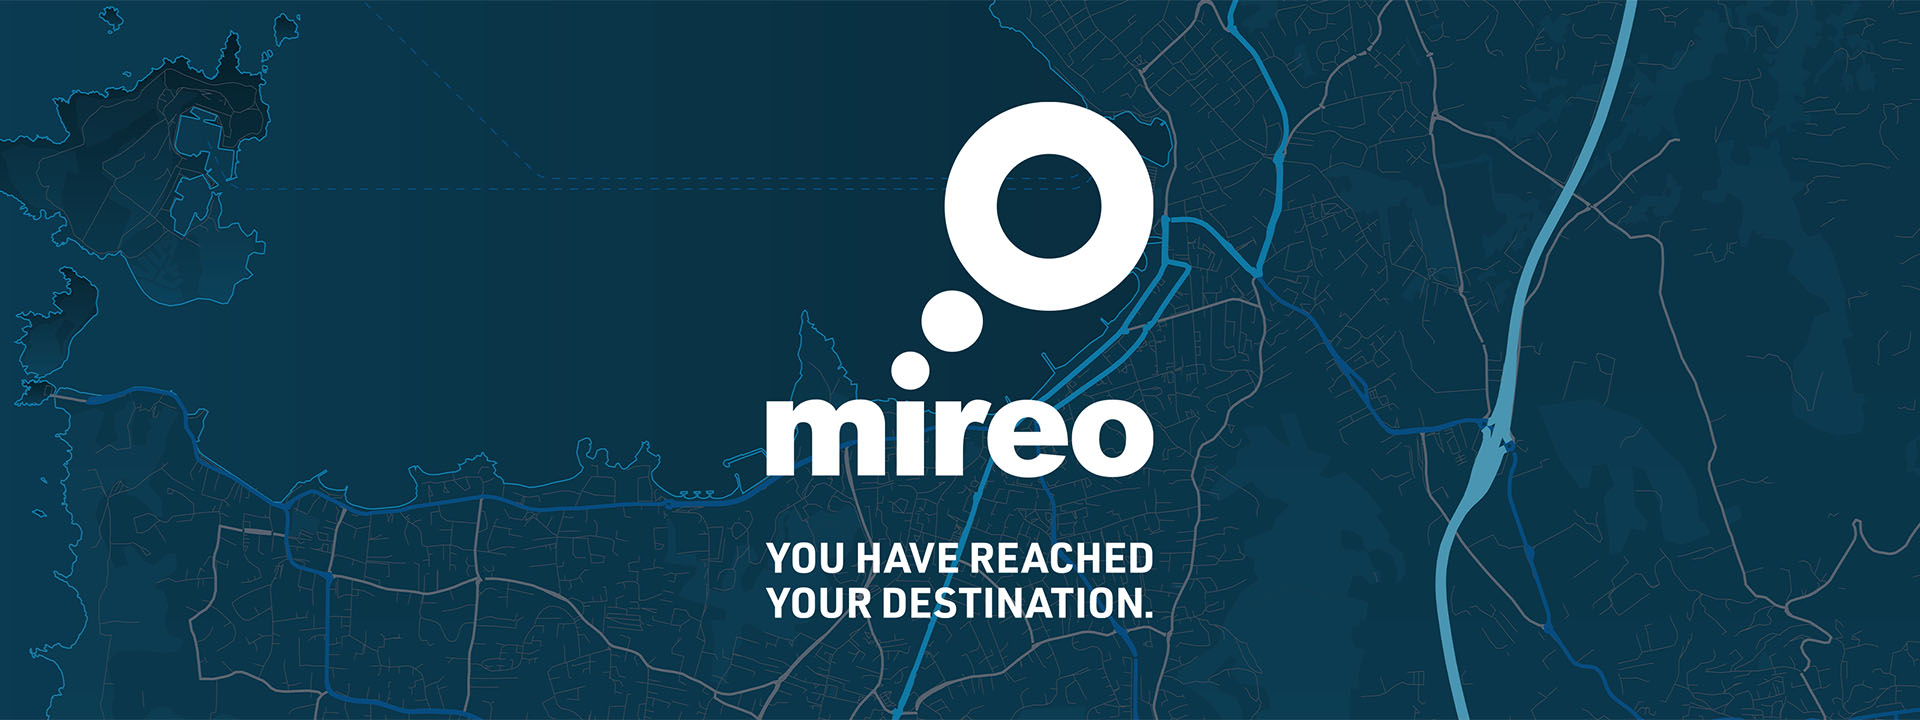 Mireo - you have reached your destination